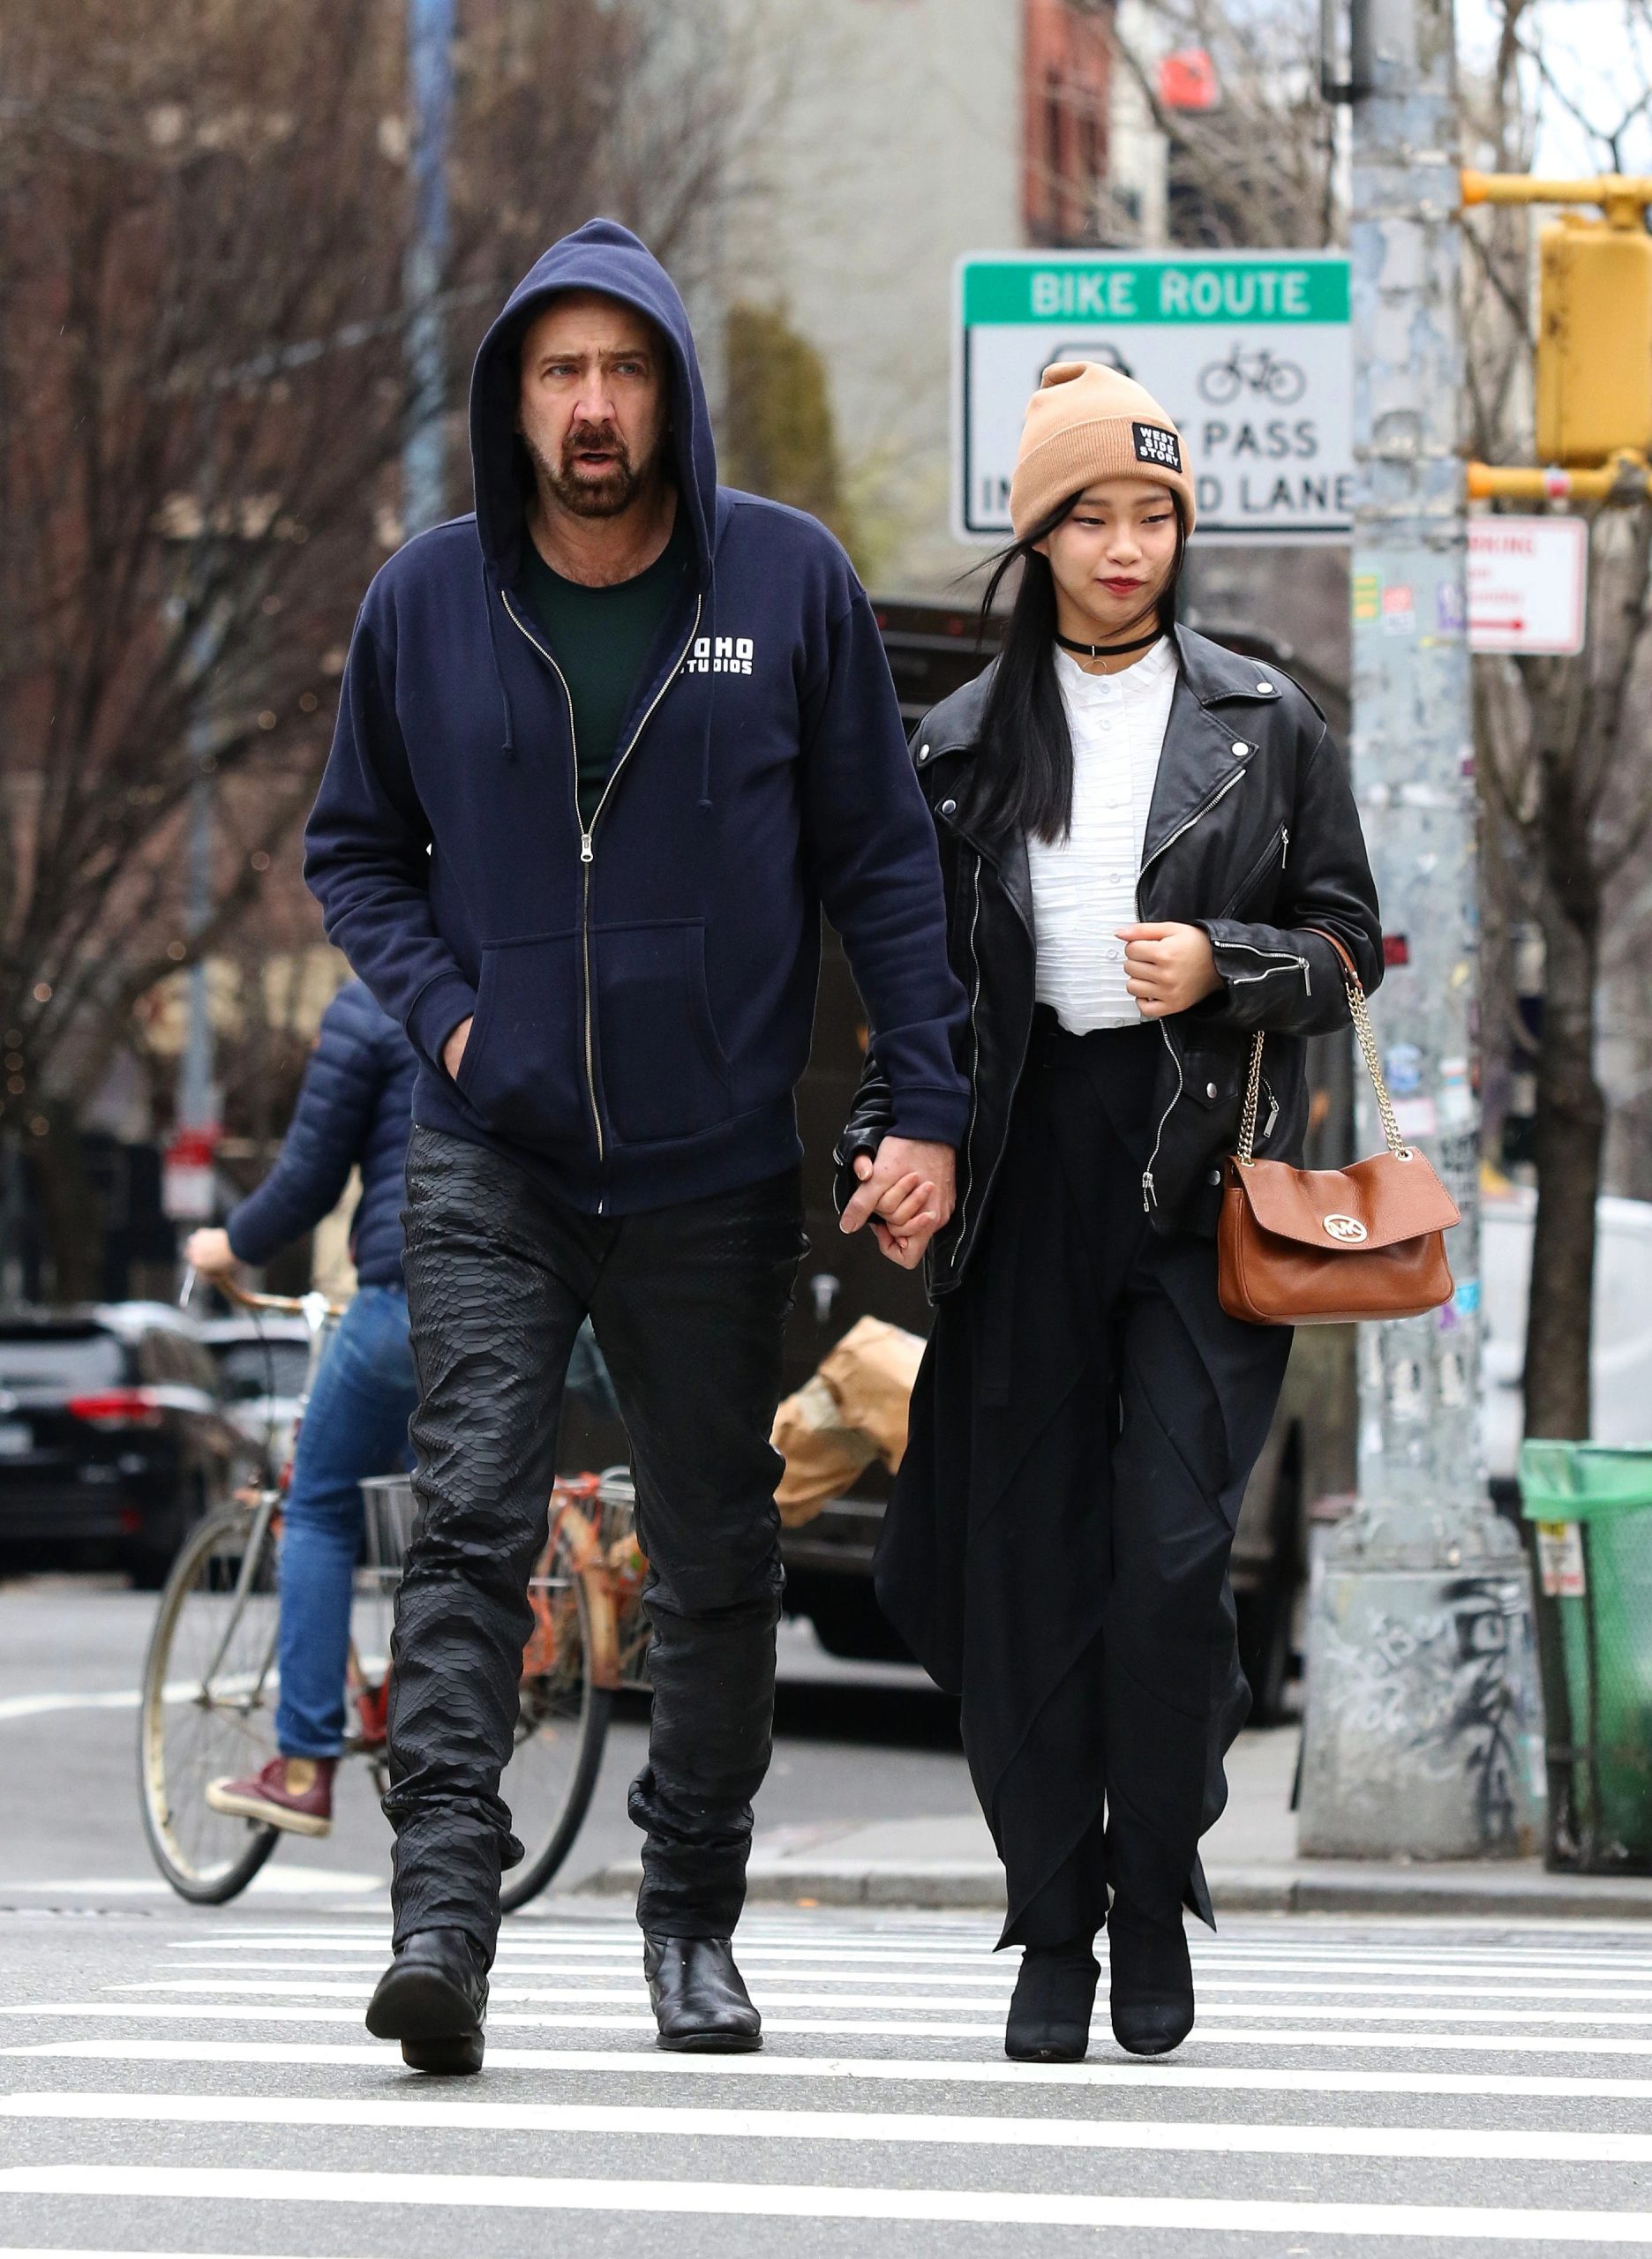 Nicolas Cage and his wife Riko Shibata snapped together at public.